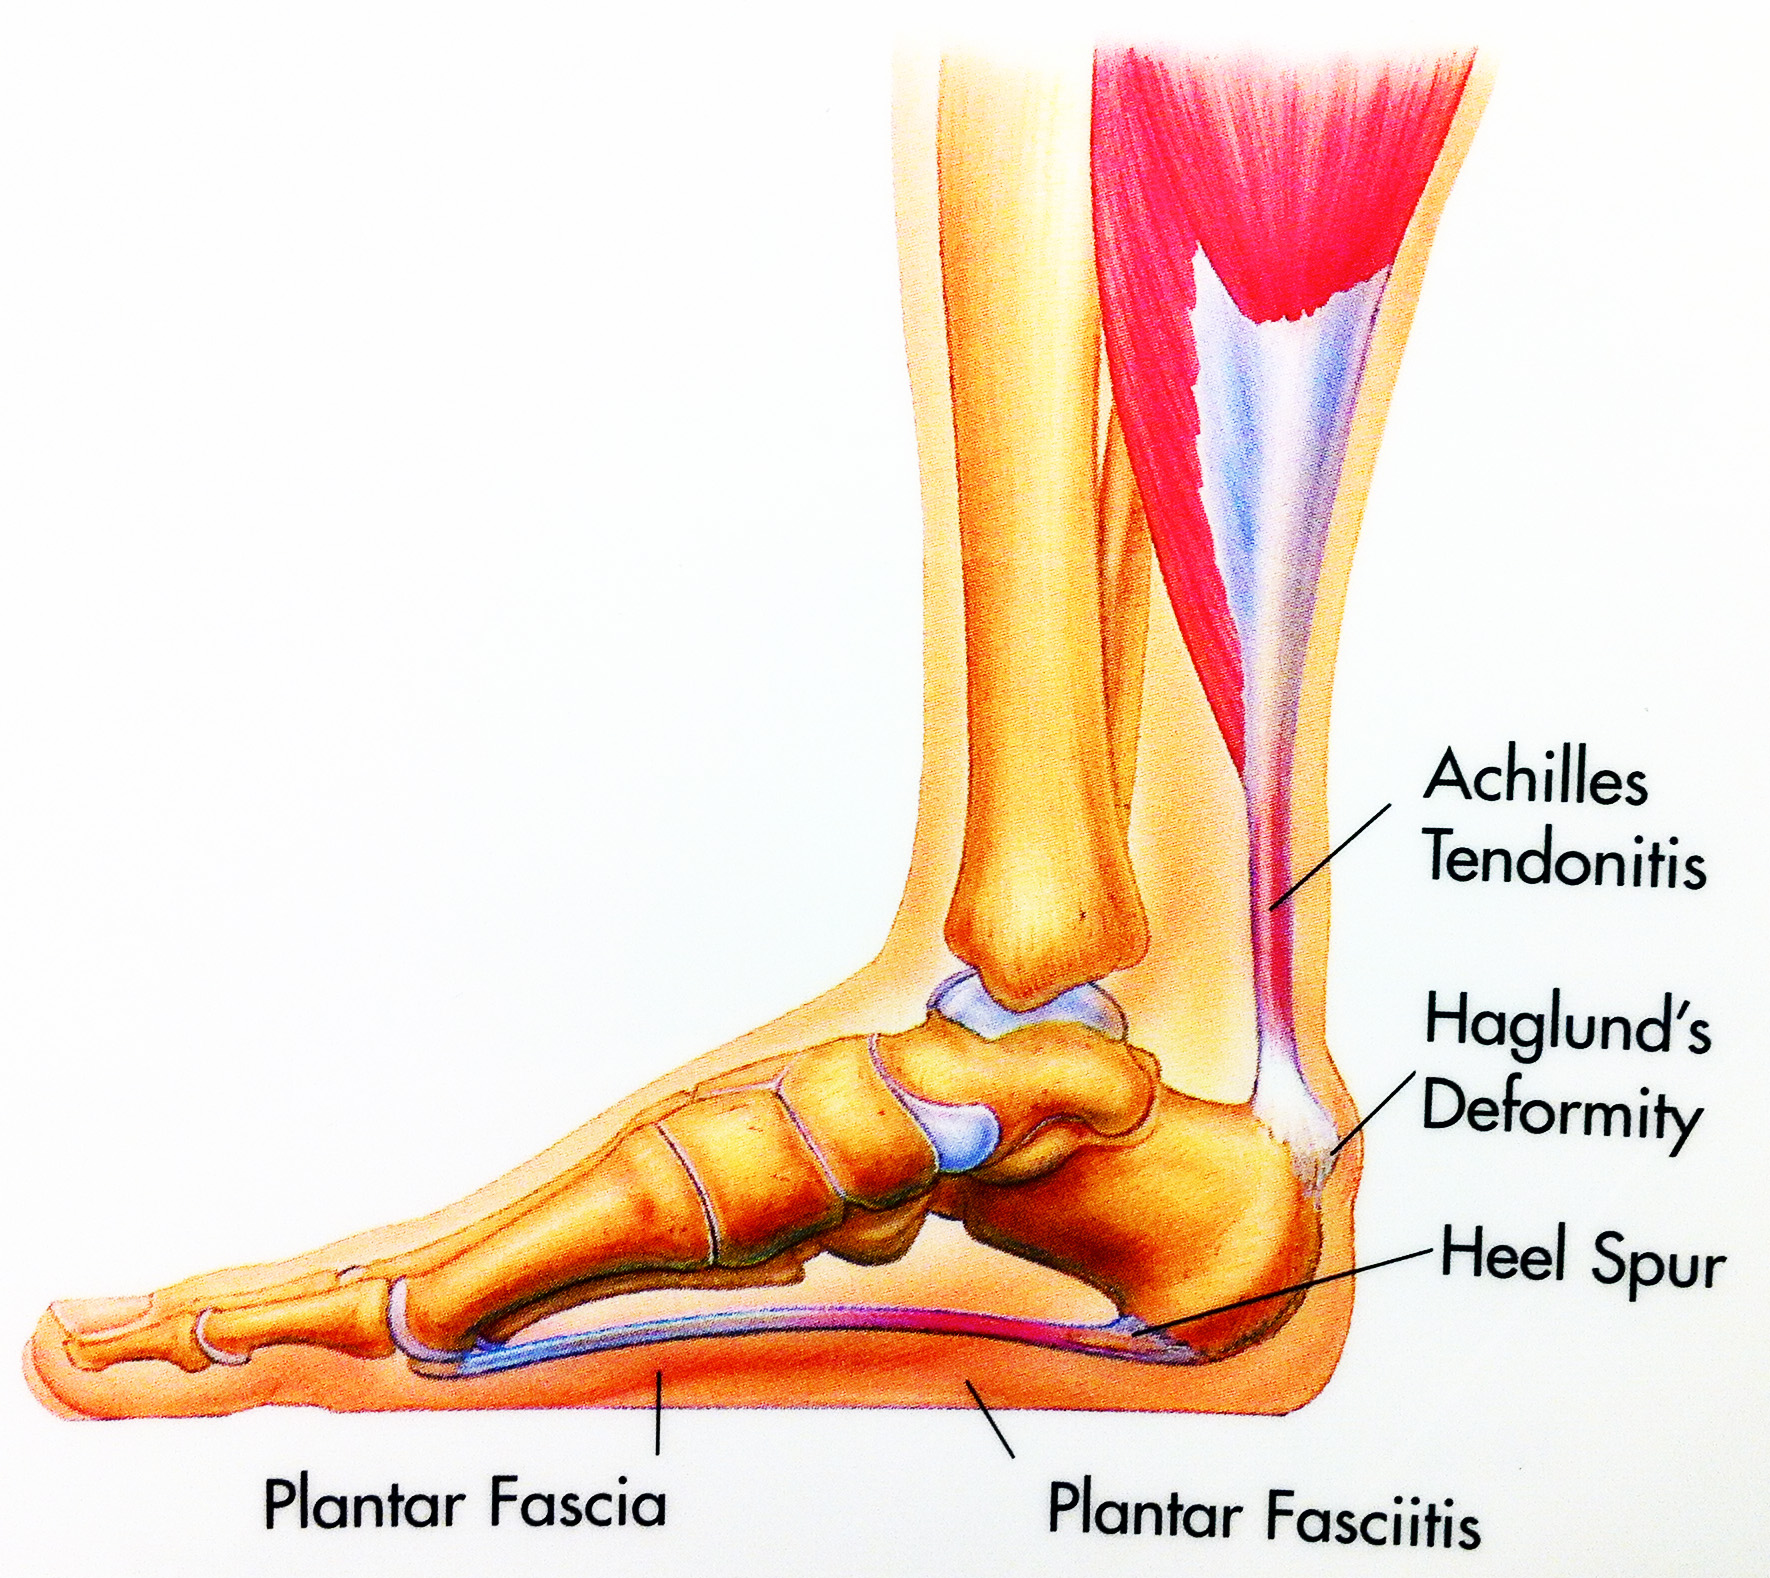 Plantar Fasciitis Surgery for Heel Spur Removal | Ankle & Foot Centers of  America - YouTube